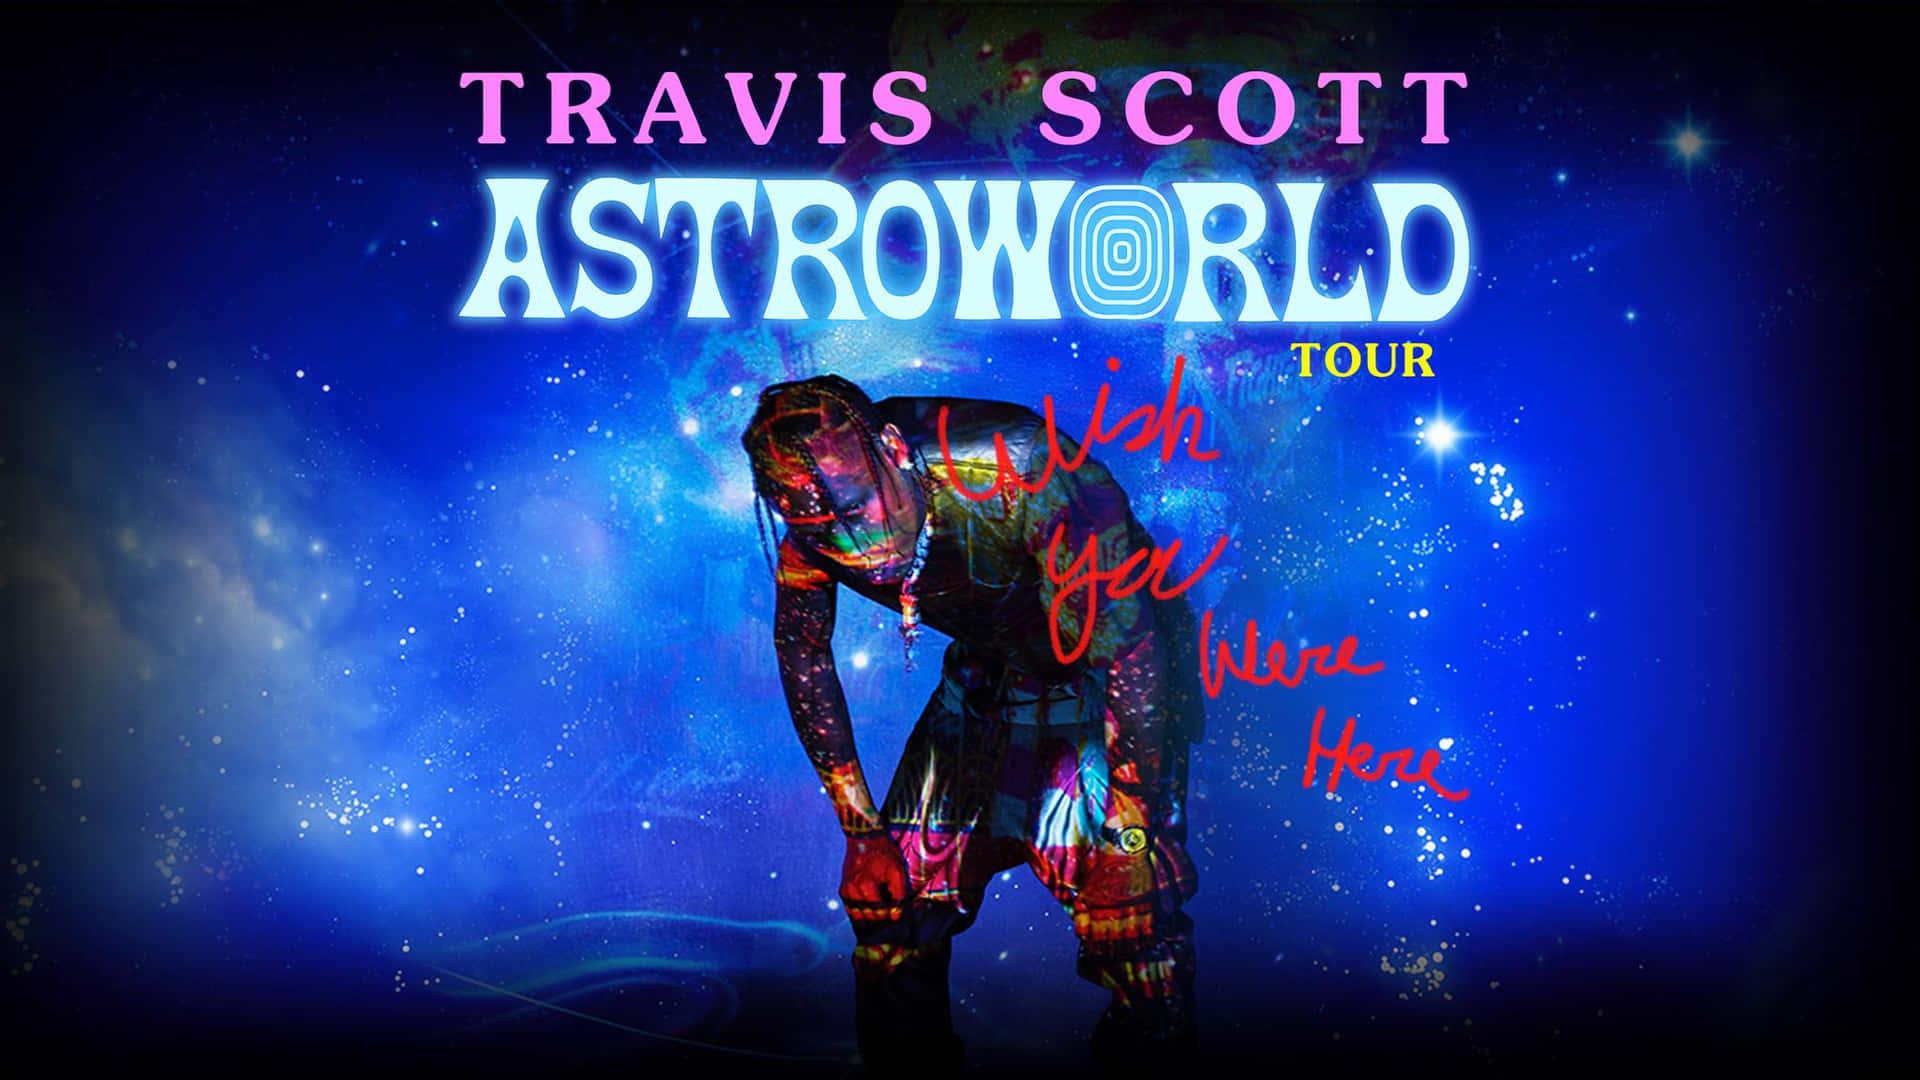 Experience the Magic of Astroworld